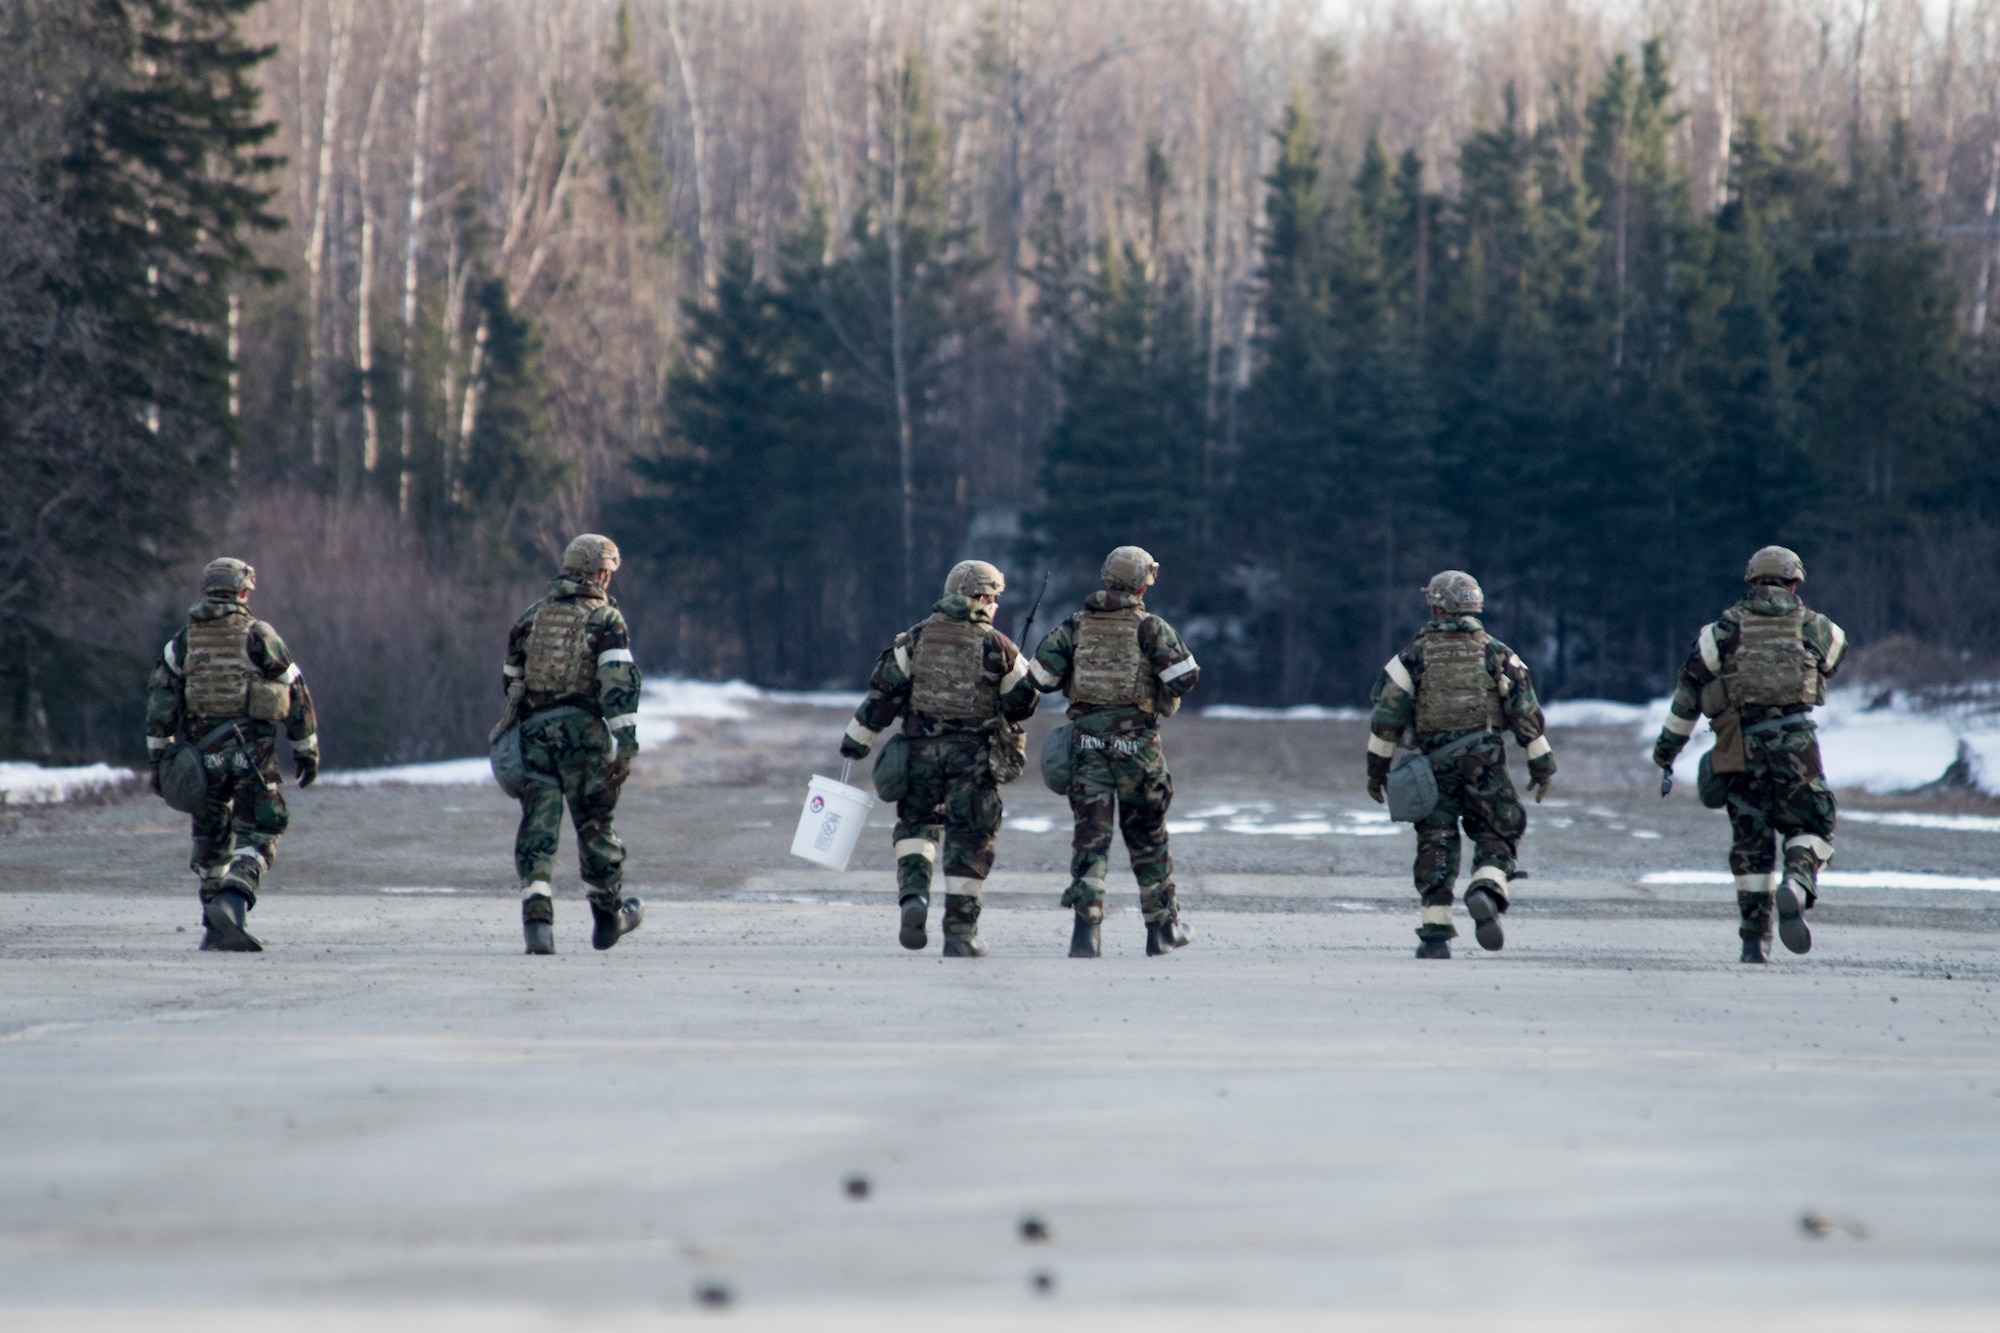 Explosive Ordnance Disposal Airmen conduct rapid clearing of submunitions on an airfield in a simulated chemical environment during Polar Force 19-4 at Joint Base Elmendorf-Richardson, Alaska, April 2, 2019. Polar Force is a two-week exercise designed to test JBER’s mission readiness and strengthen and develop the skills service members require when facing adverse situations.